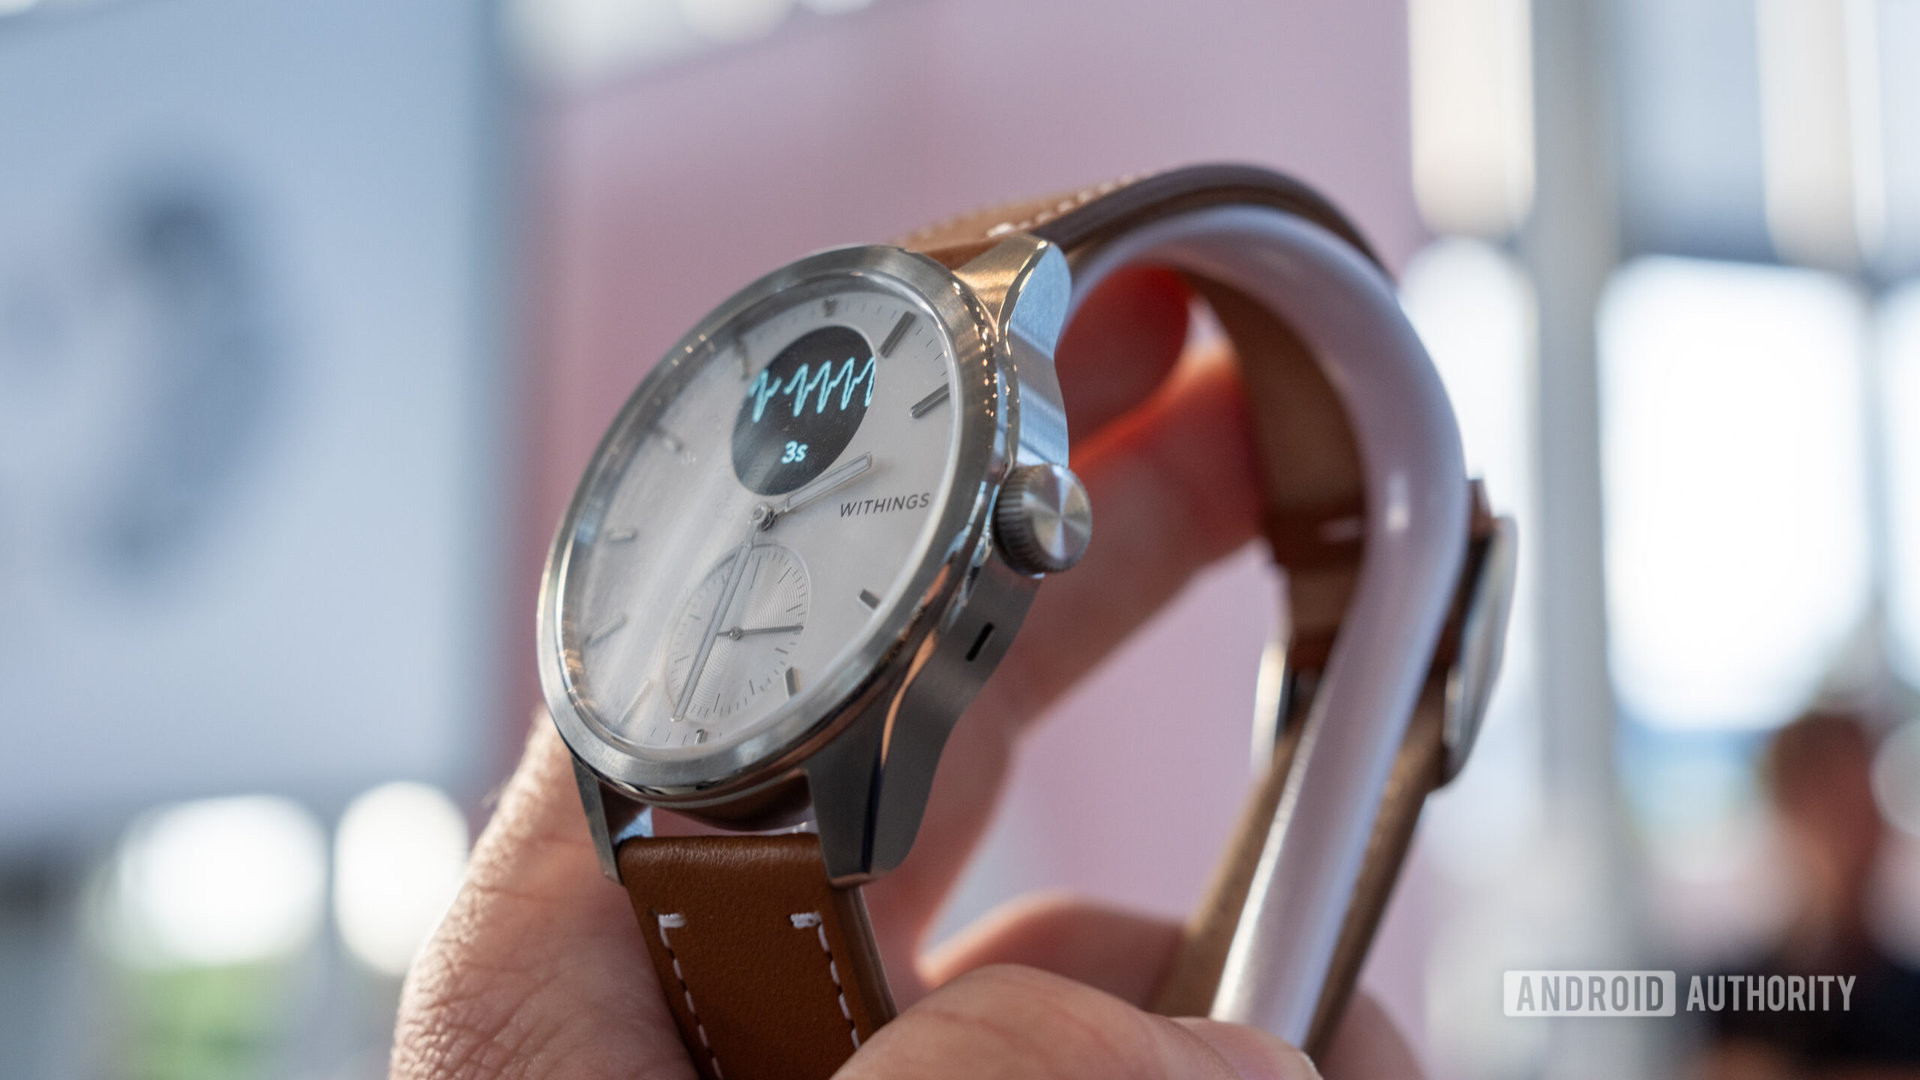 Withings Scanwatch 2 with brown leather strap from side angle showing crown